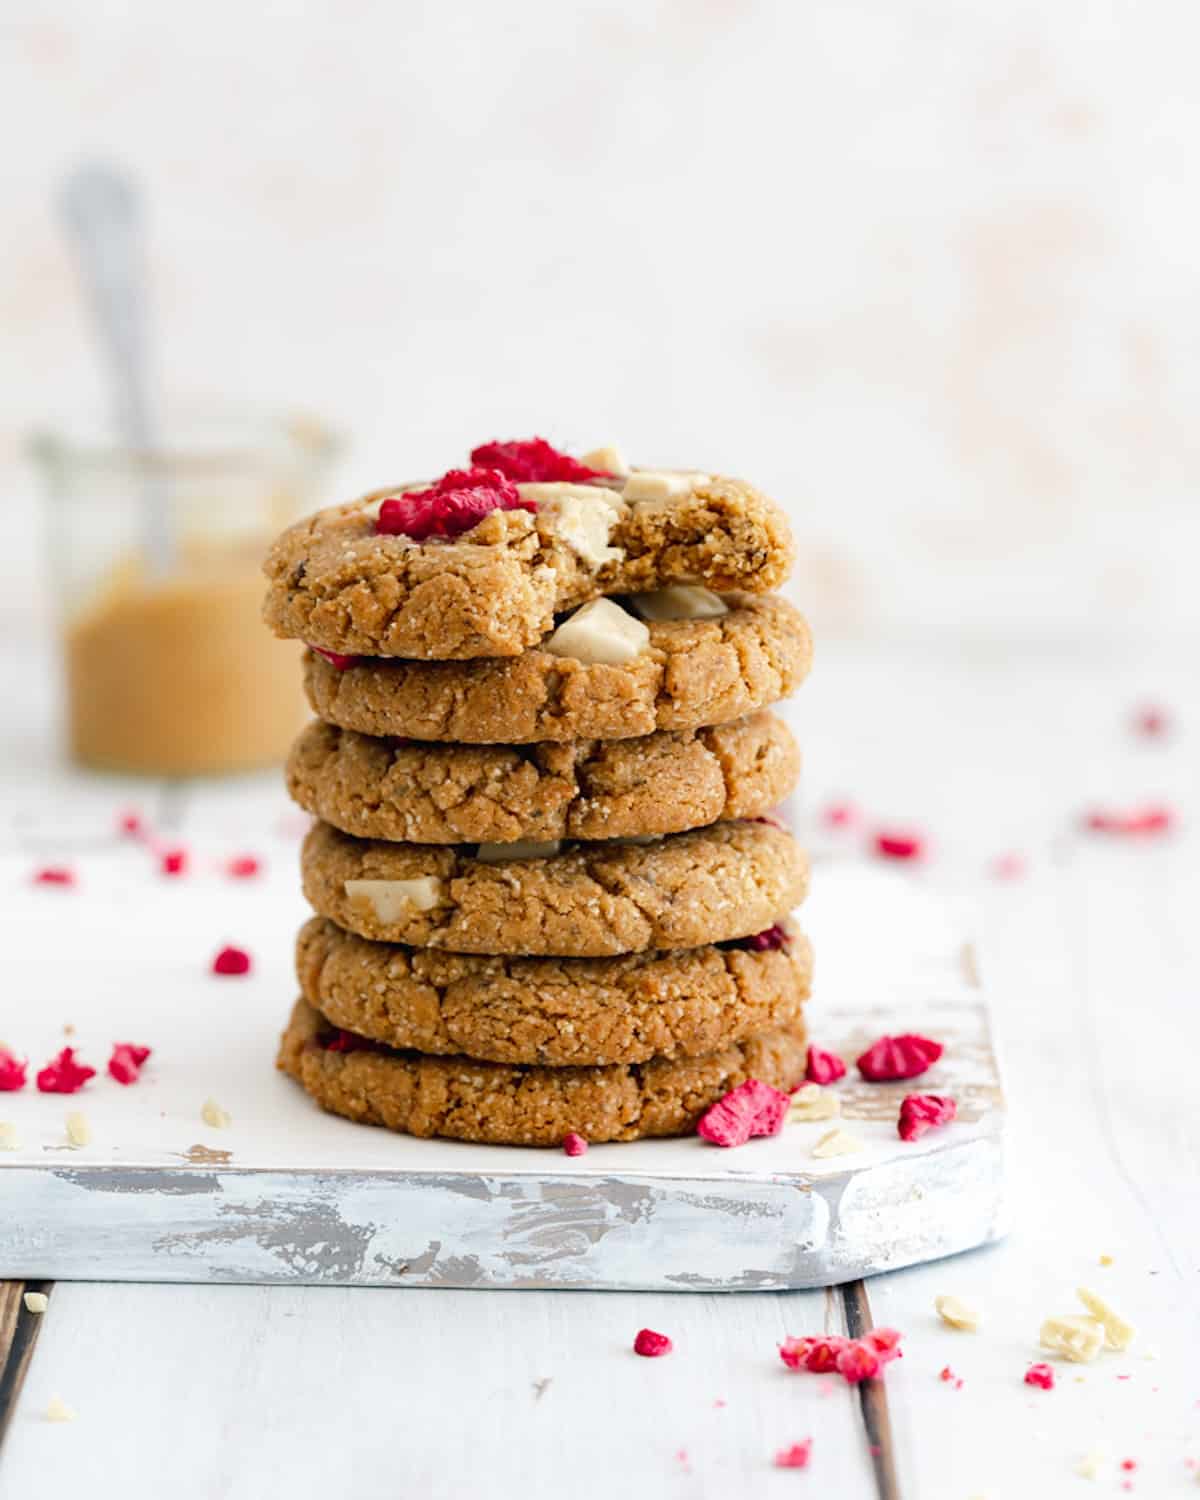 stack of white chocolate chip cookies with raspberries on a white washed wooden chopping board.